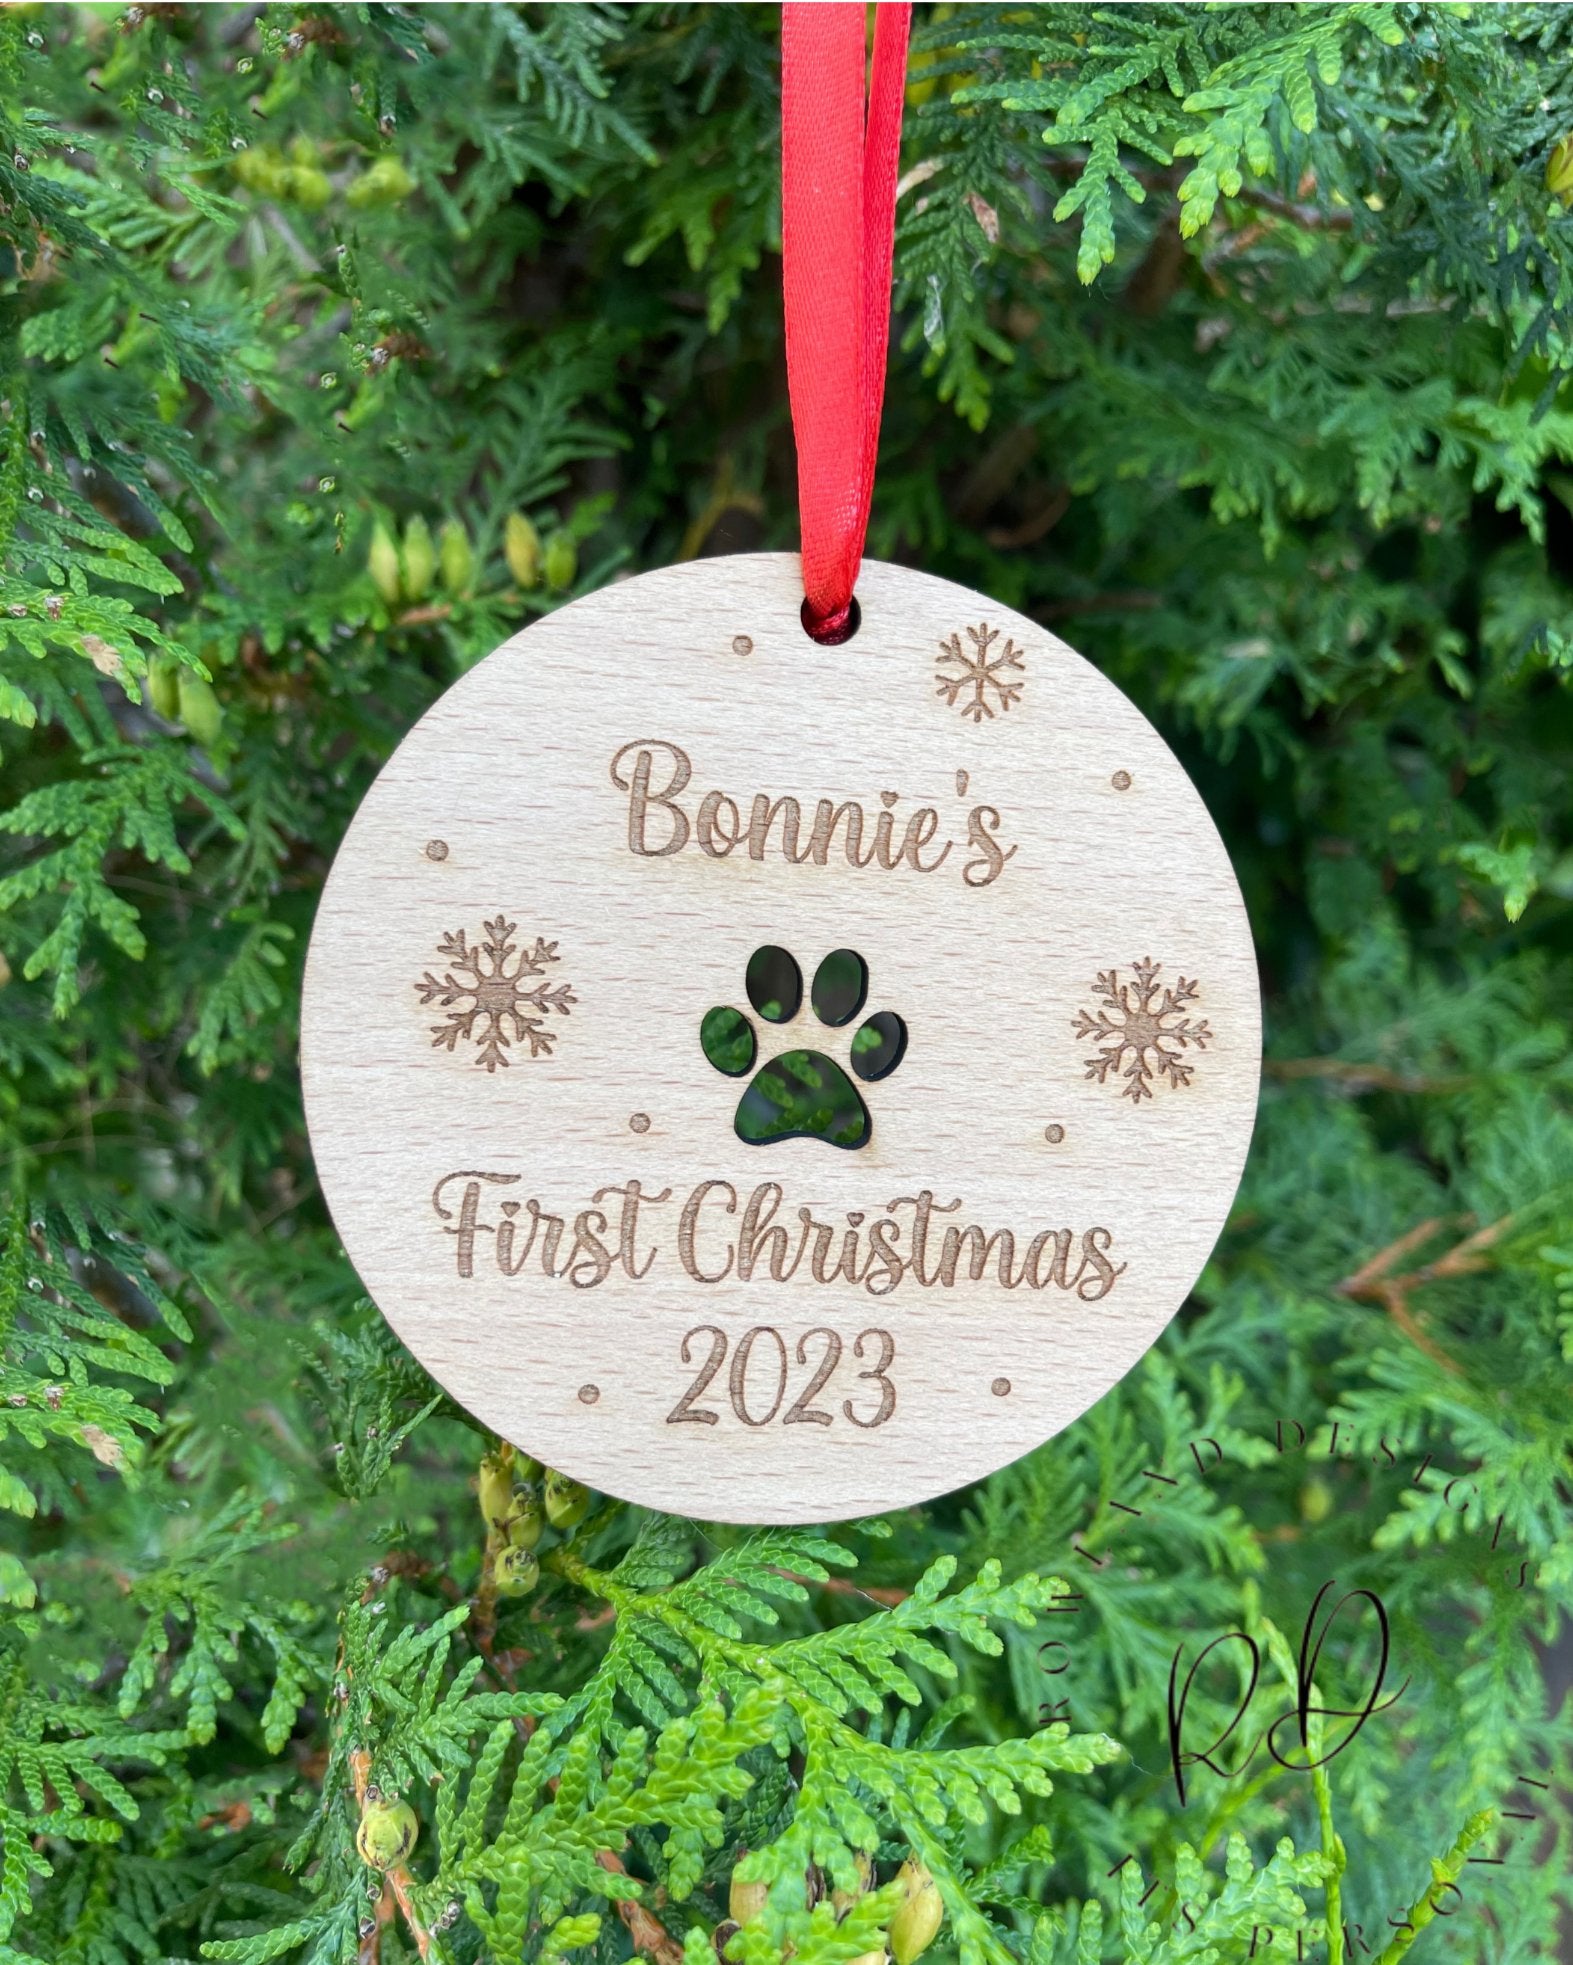 Personalised Wooden Paw Print Christmas Bauble with Name Engraving, Snowflakes, and 'First Christmas' Inscription